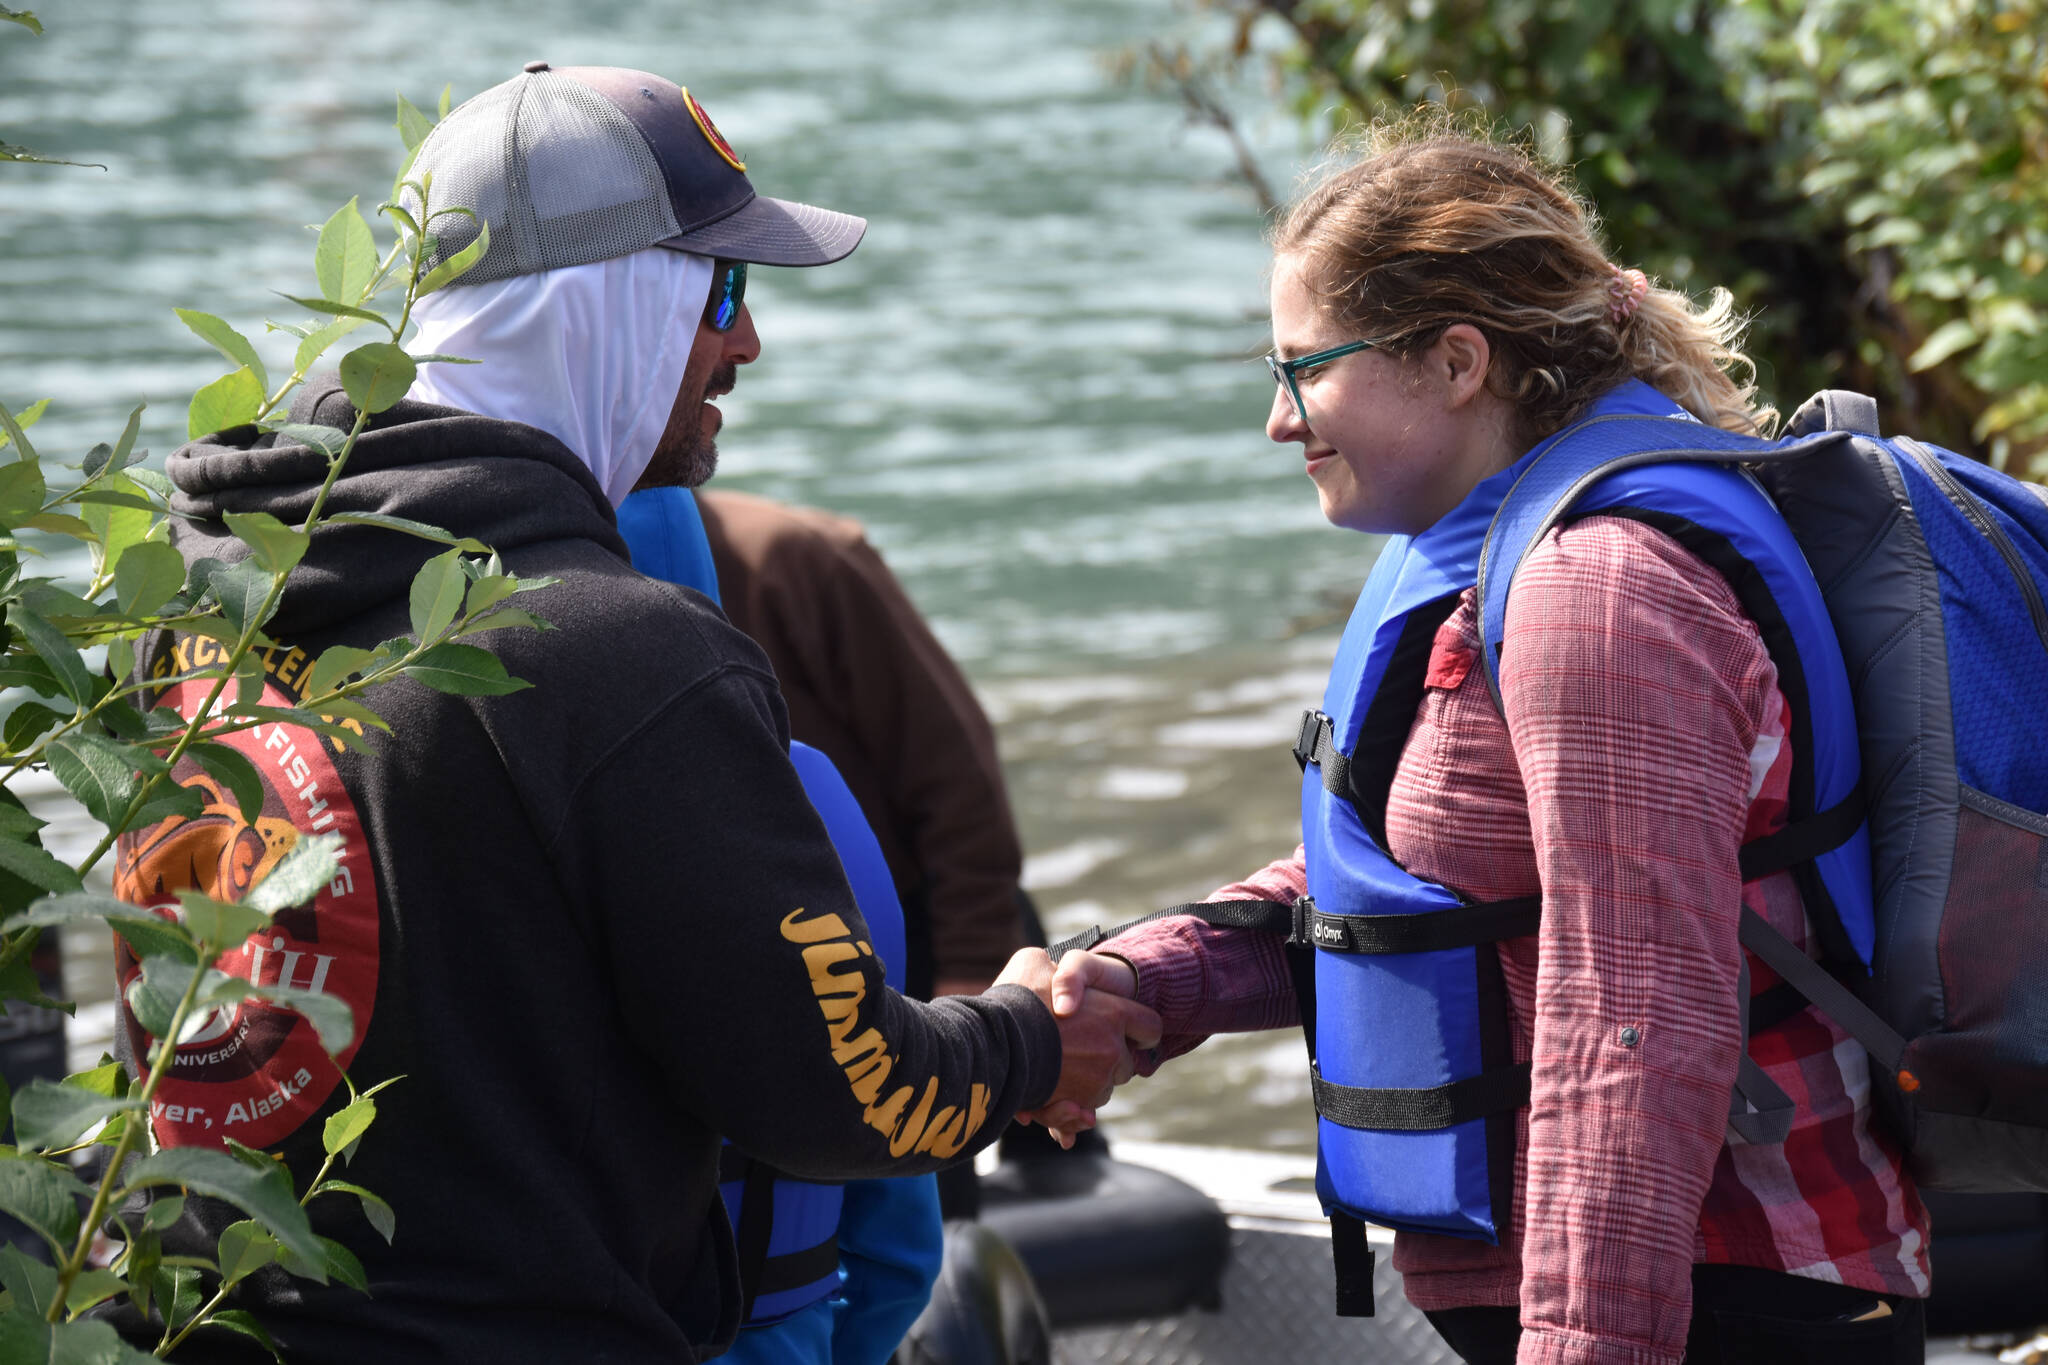 A fishing guide greets one of his passengers at the Kenai River Junior Classic in Soldotna, Alaska, on Aug. 10, 2022. (Jake Dye/Peninsula Clarion)